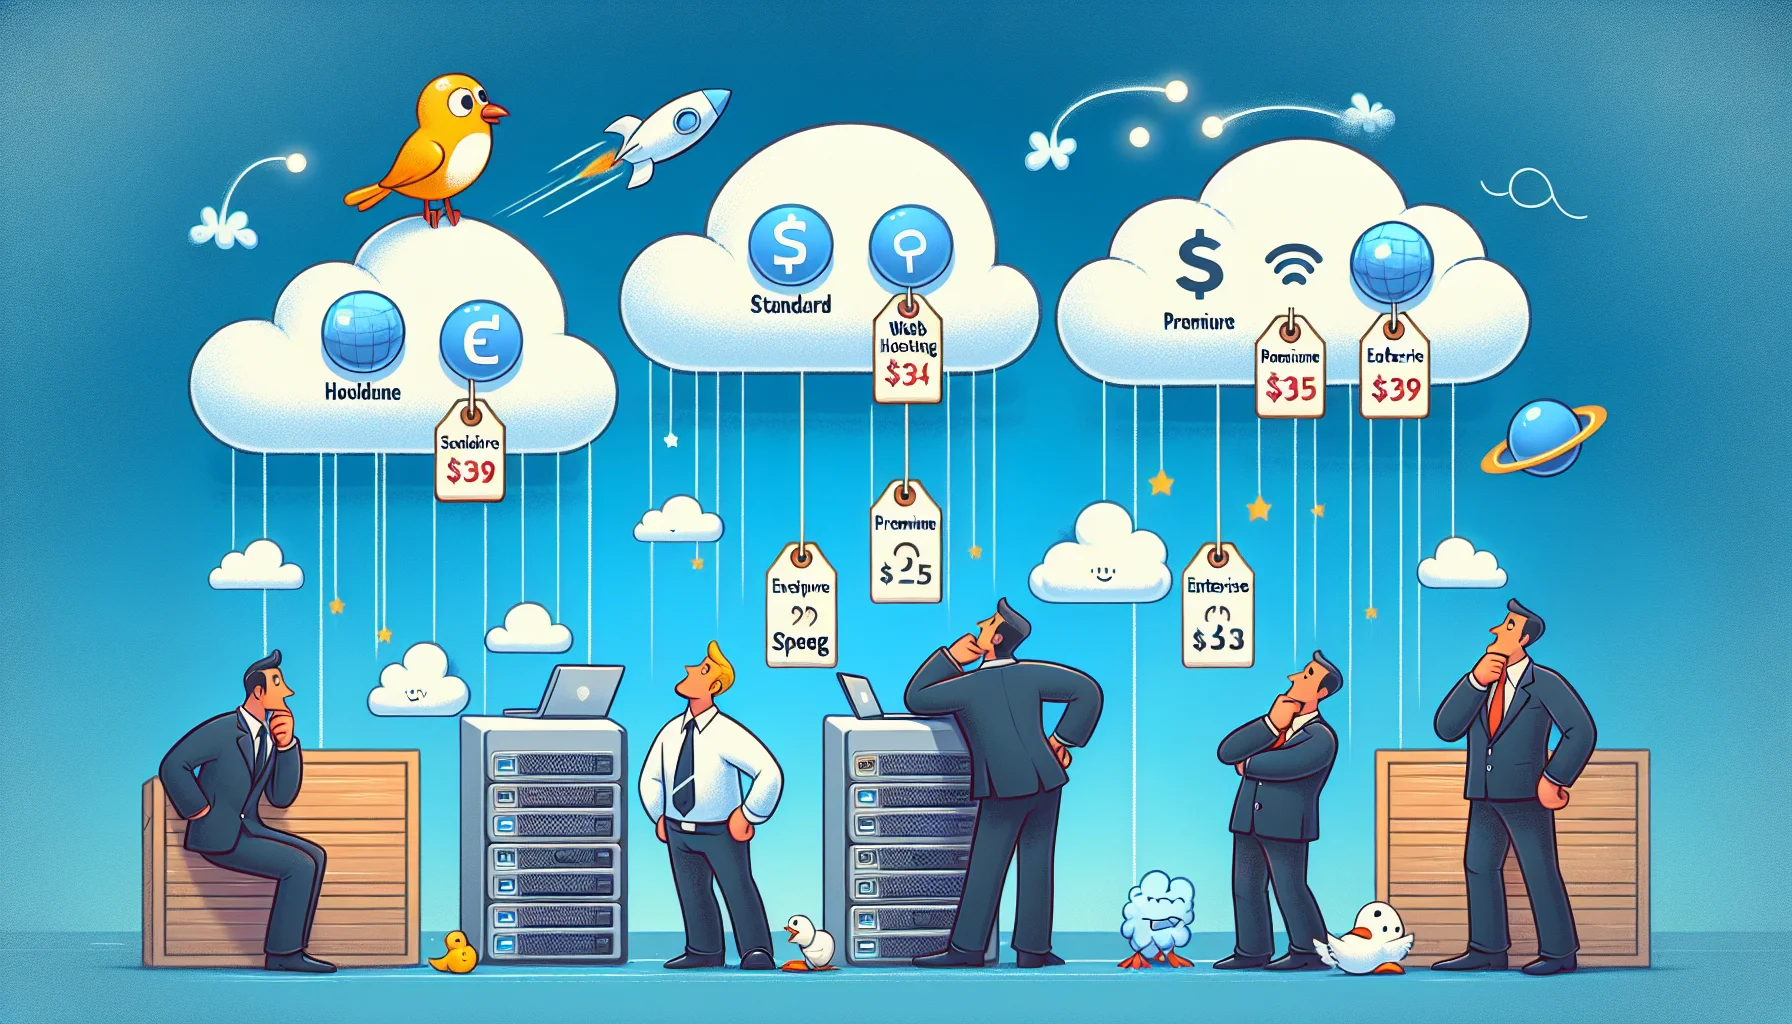 Create a humorous image that visualizes the concept of affordable web hosting services for online businesses. Imagine a scene where anthropomorphic internet browsers are dressed as businesspeople looking at price tags hanging from clouds that symbolize server space. On each cloud, depict different symbols representing standard, premium, and enterprise web hosting packages. Also include a small, light-hearted character, such as a cartoon bird tweeting or a jovial comet, signifying swift online communication or speed. The imagery should be attractive, engaging, and convey a sense of affordability and efficiency. Make sure the palette is vibrant and the general ambiance is uplifting.